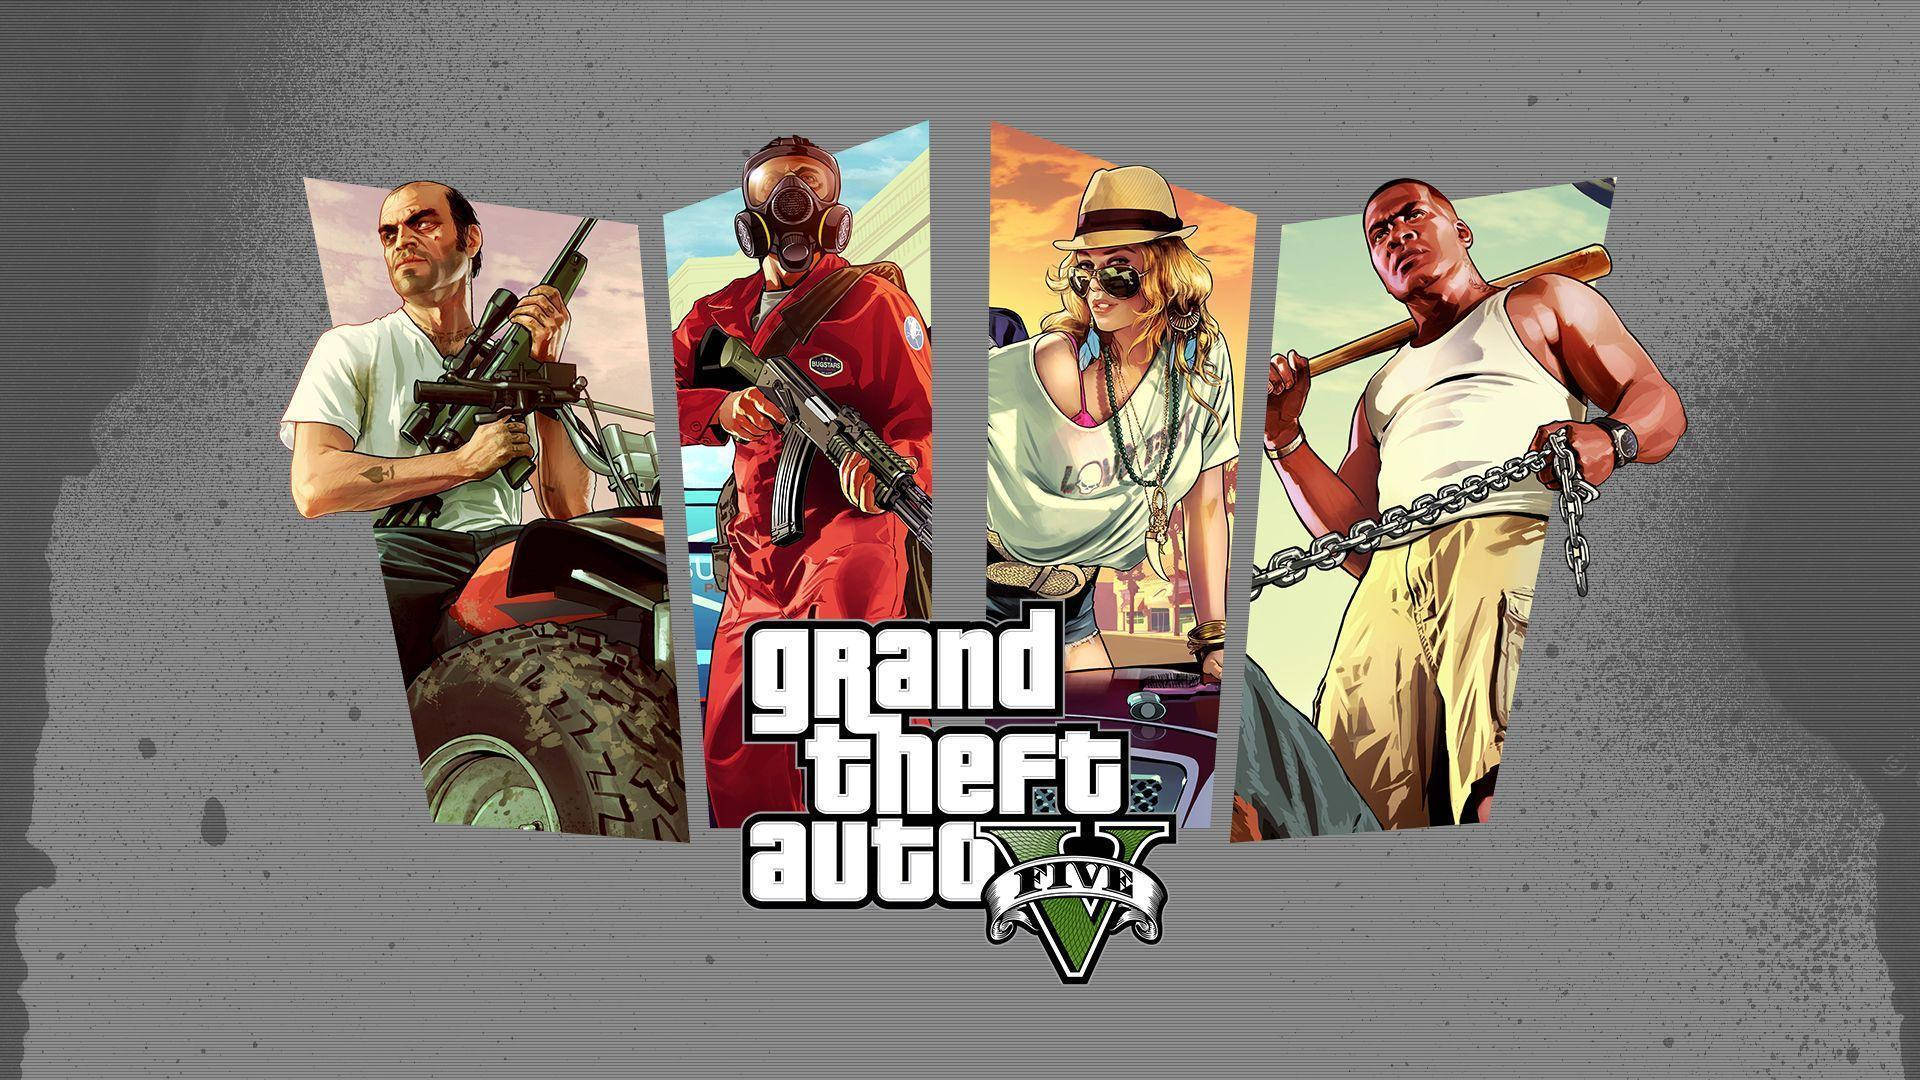 Grand Theft Auto V Characters Against Gray Background Wallpaper